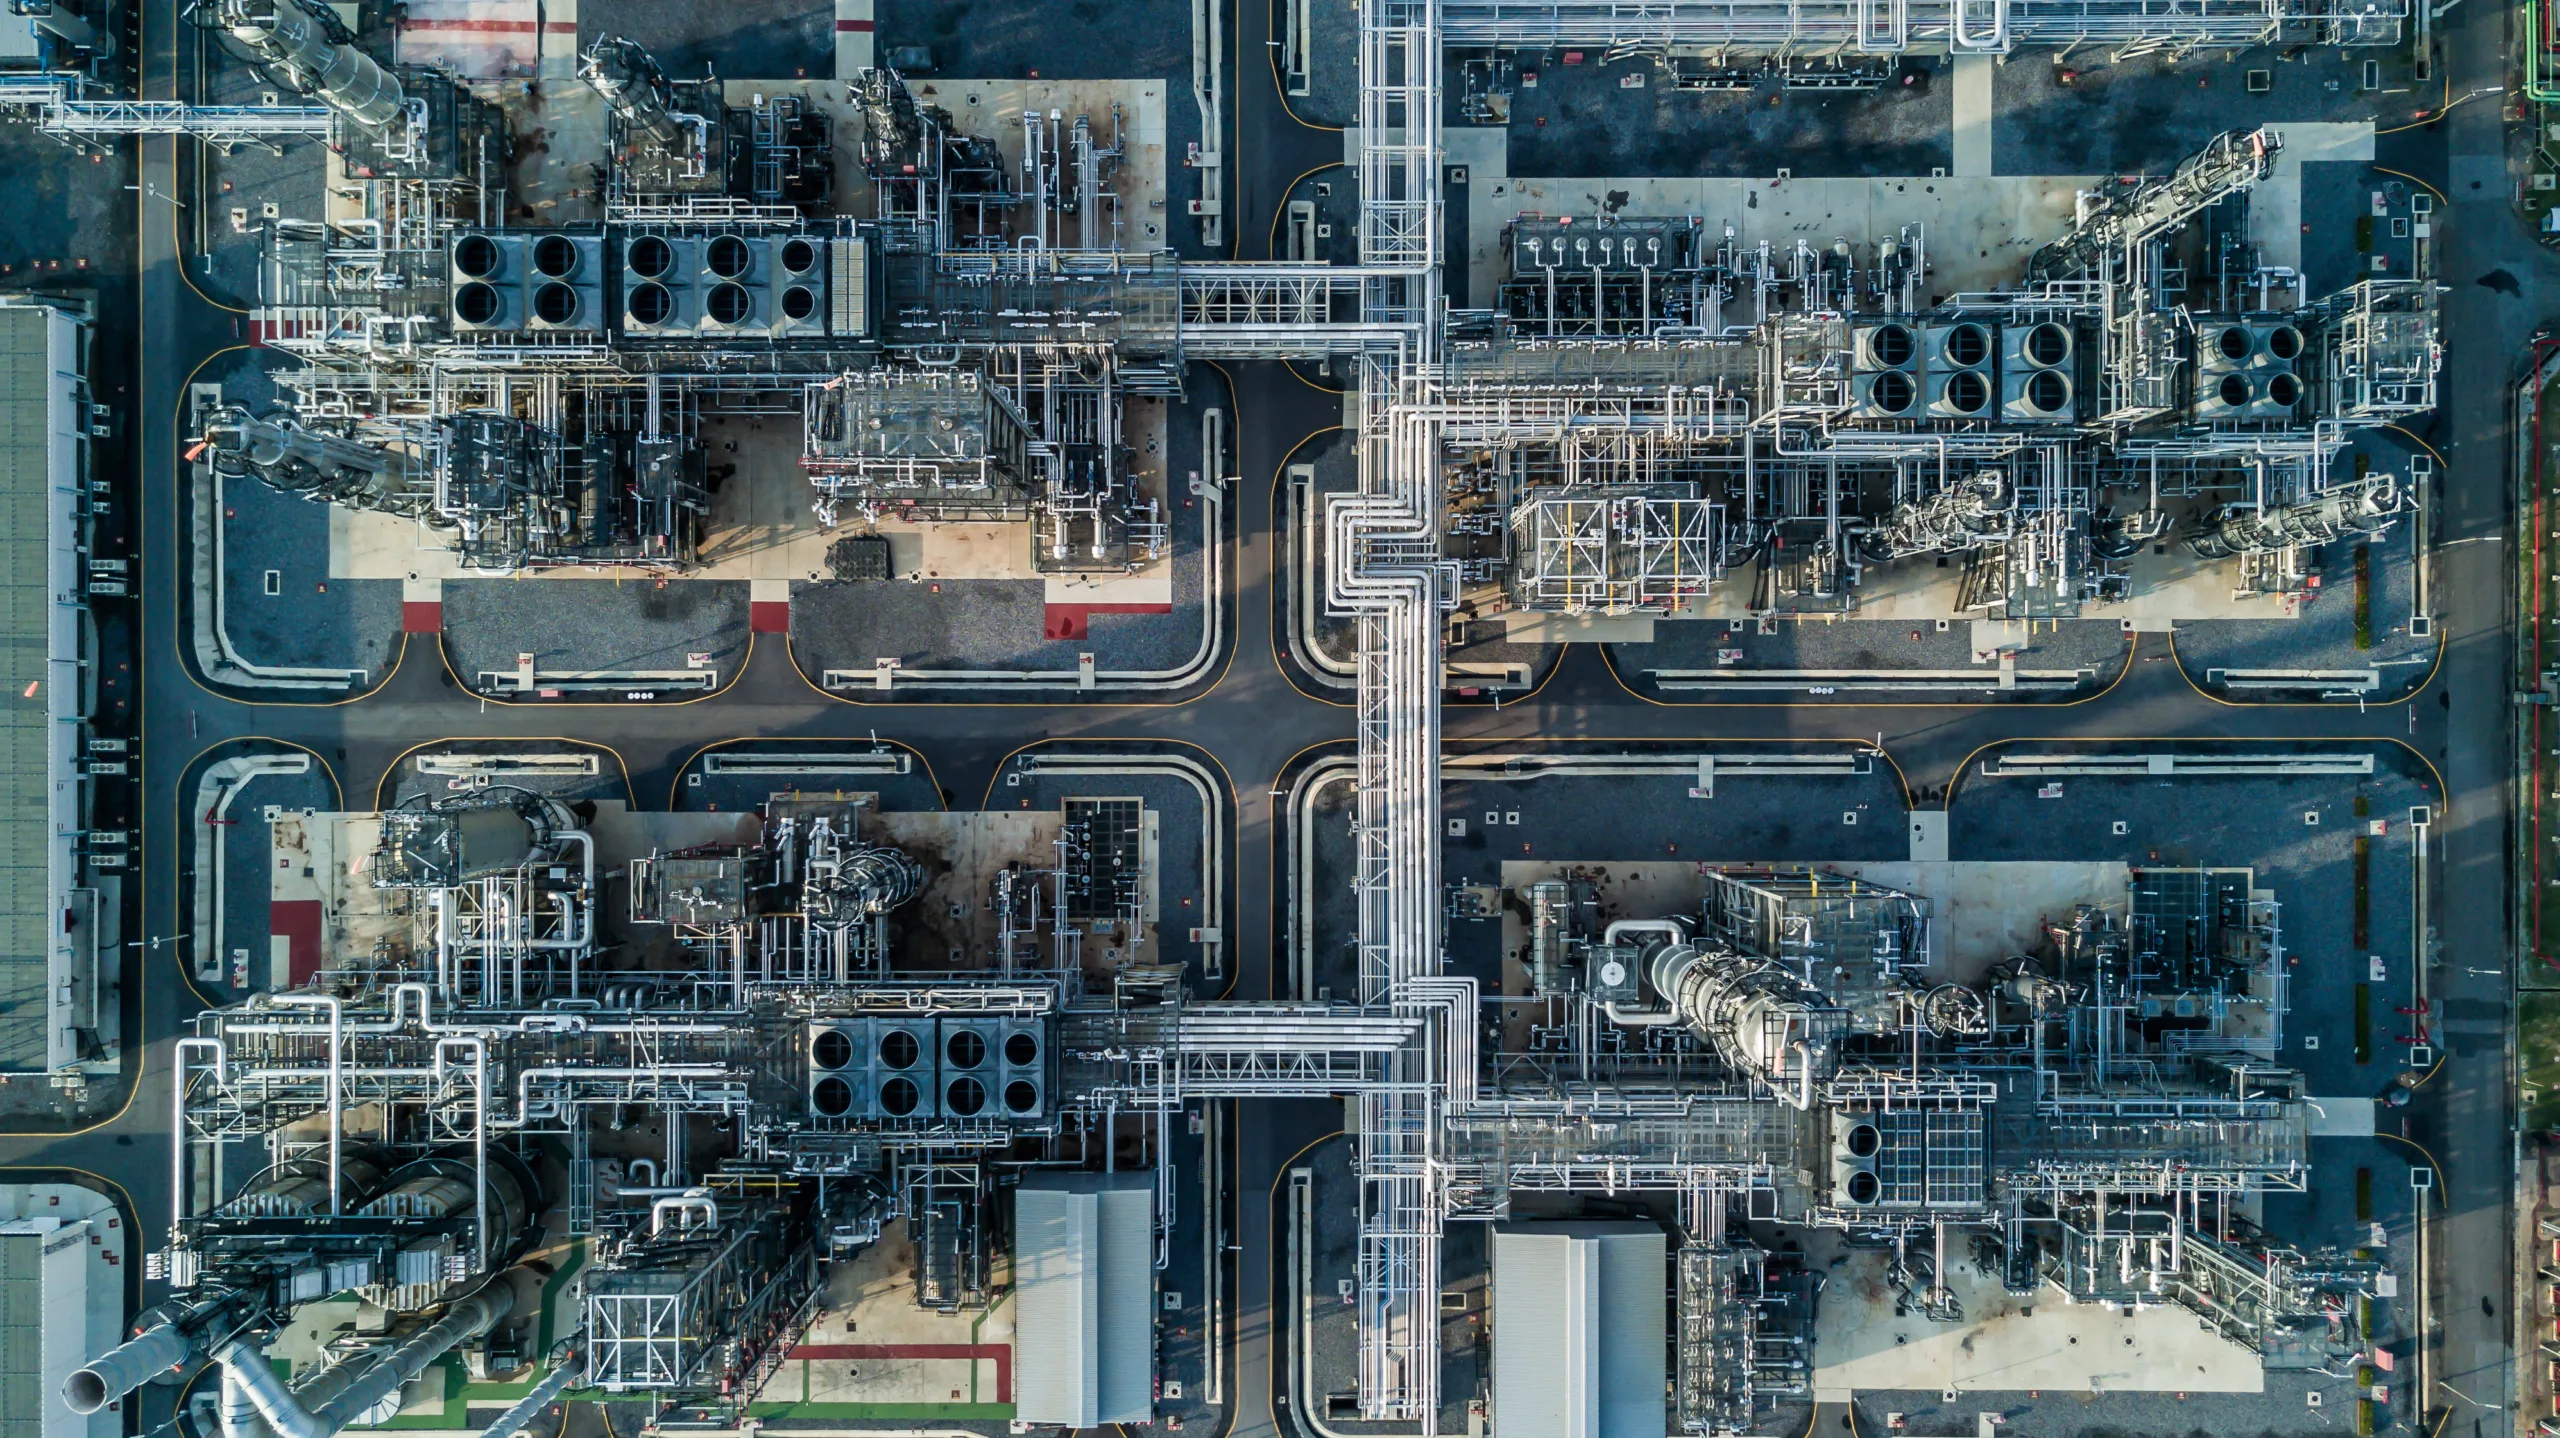 Aerial view oil refinery